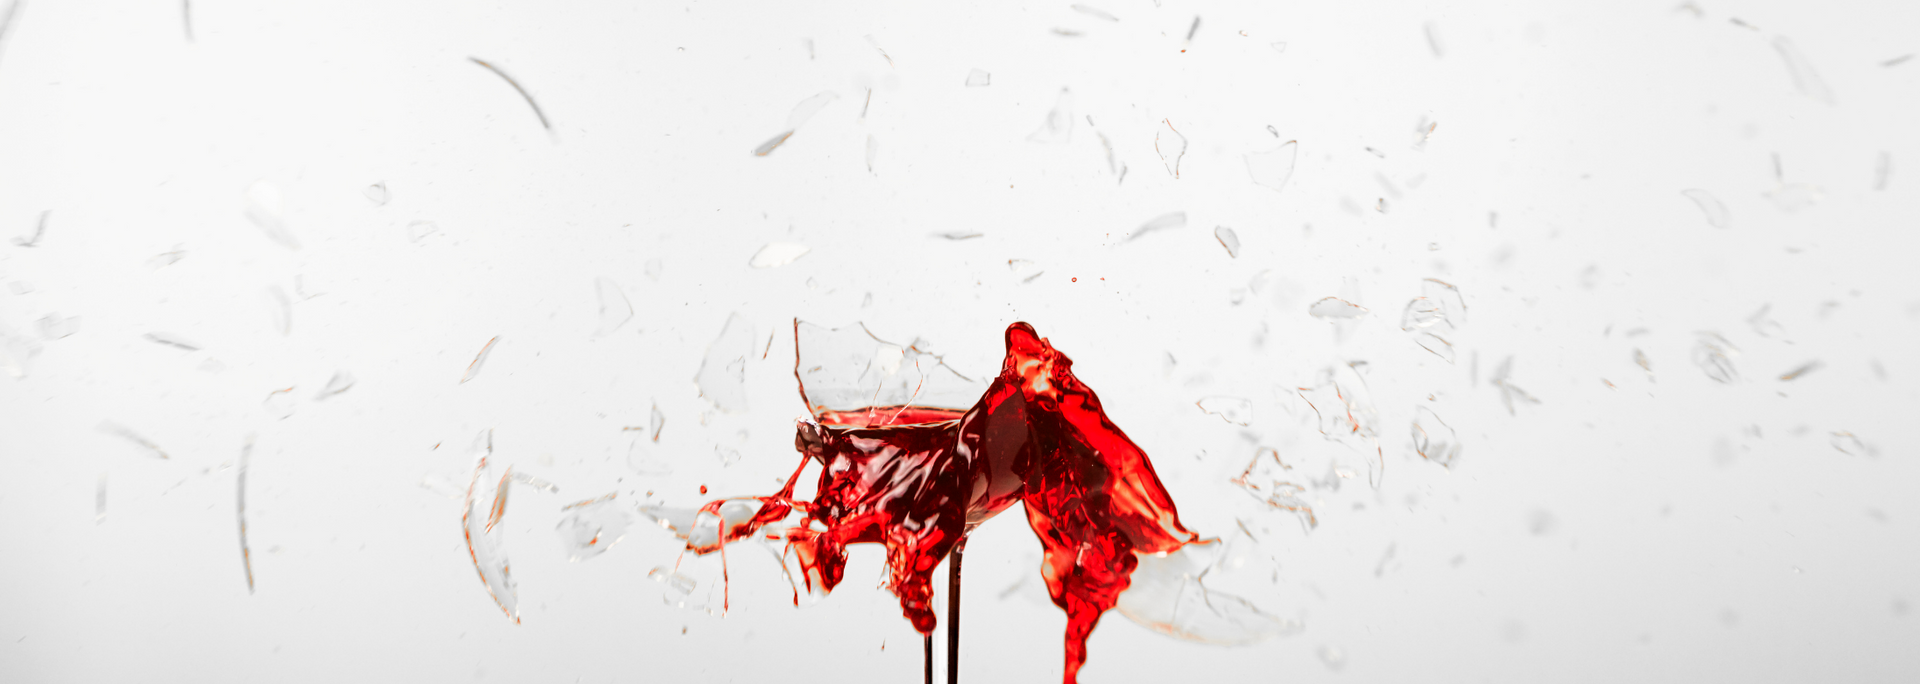 Picture of a wine glass smashing